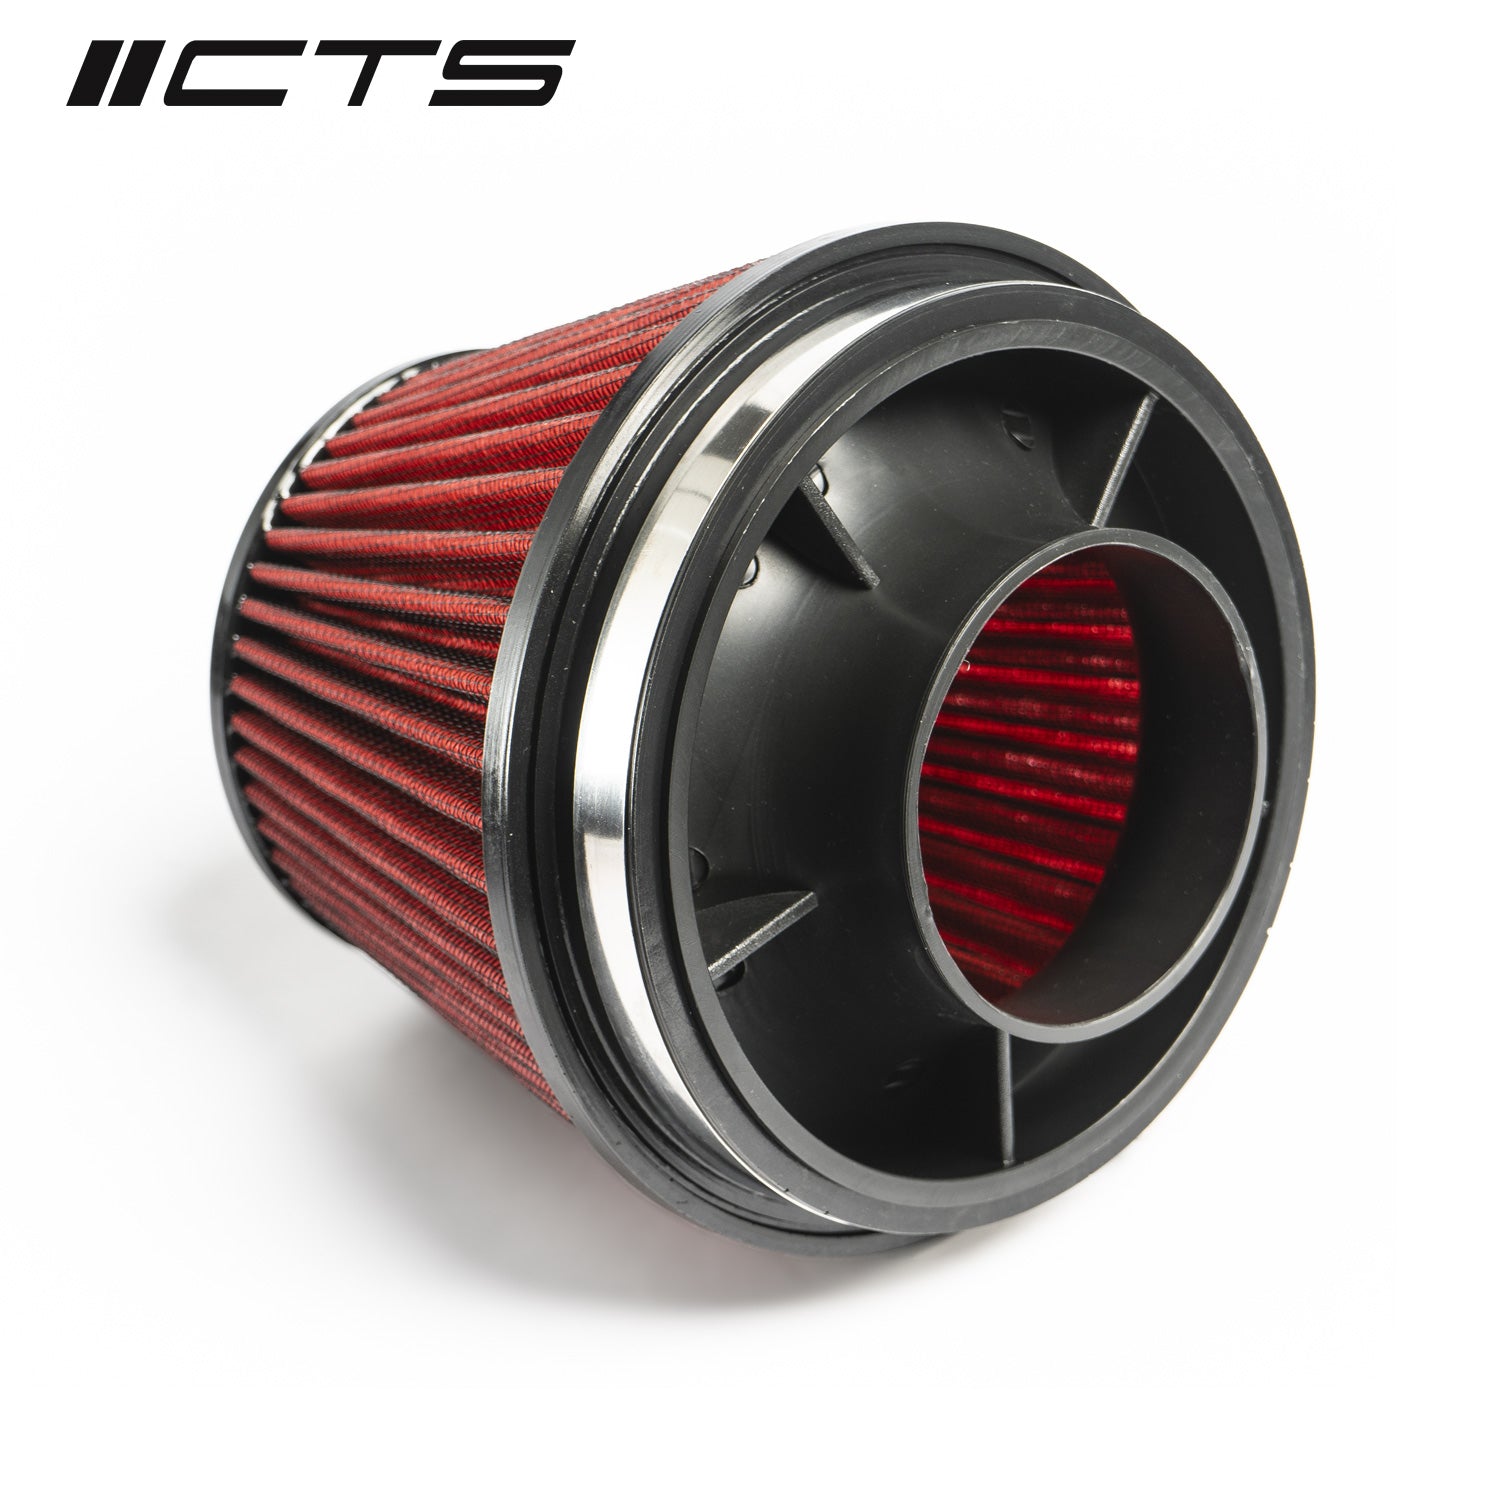 CTS TURBO AUDI C7/C7.5 A6/A7 AIR INTAKE SYSTEM (TRUE 3.5″ VELOCITY STACK) - 0